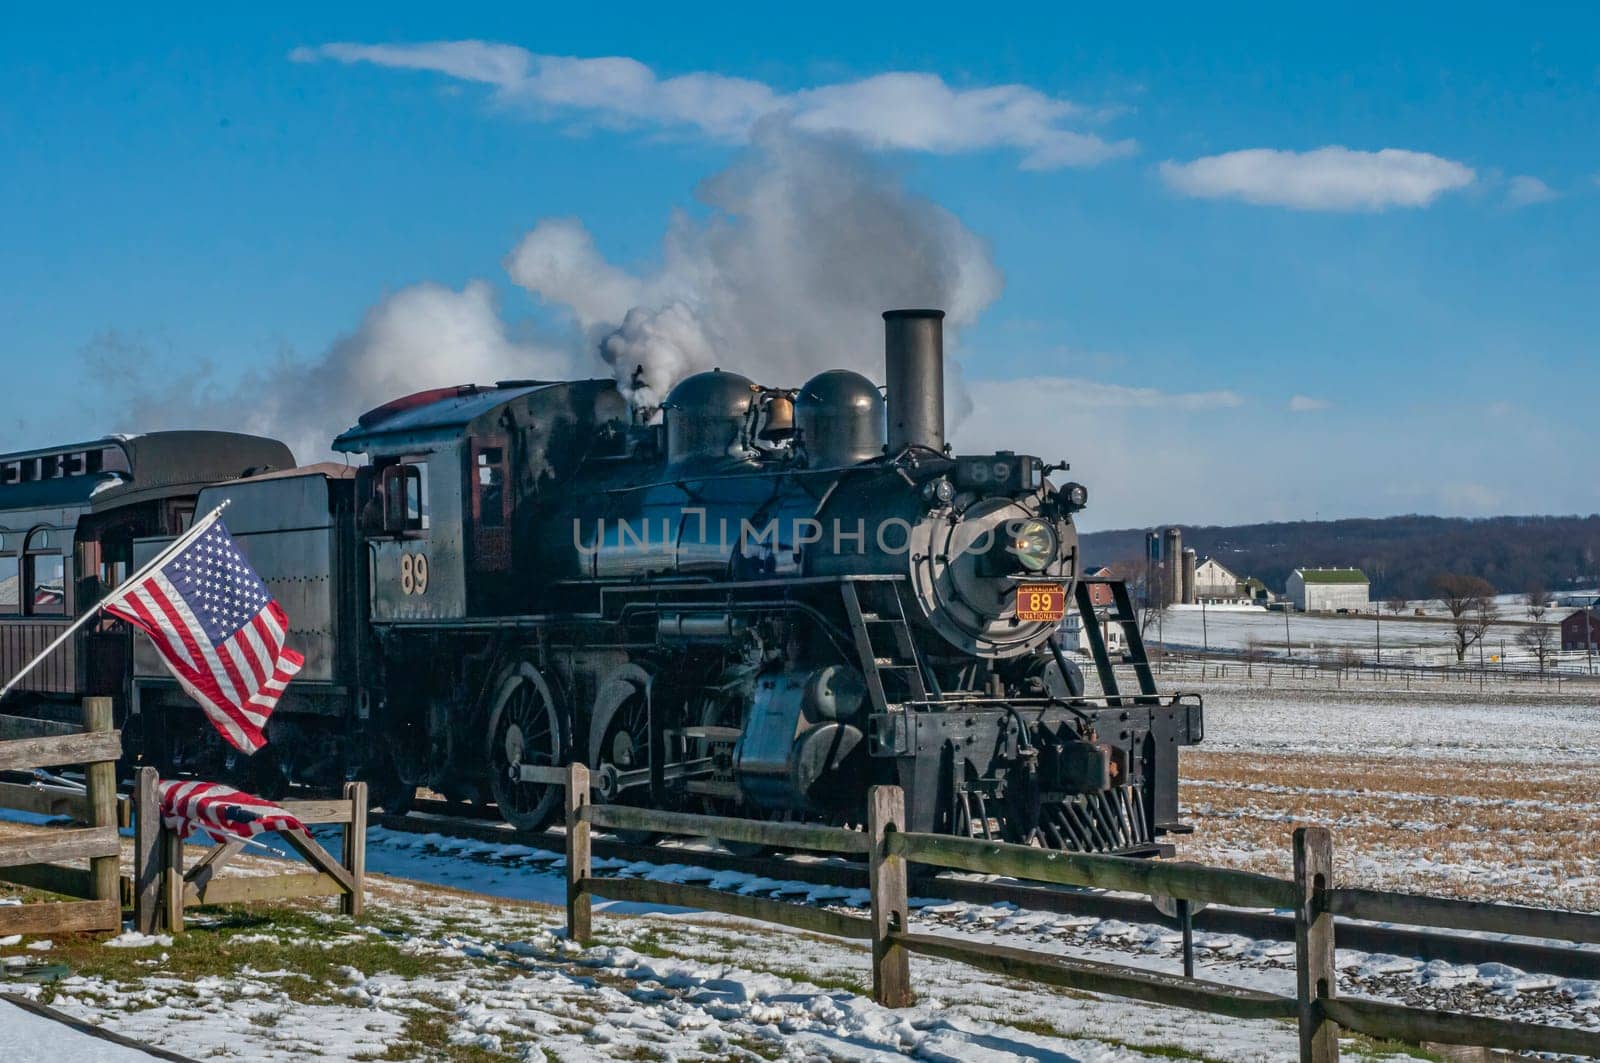 Ronks, Pennsylvania, USA, February 17, 2024 - A steam train is pulling a train car with an American flag on it. The train is traveling through a snowy field